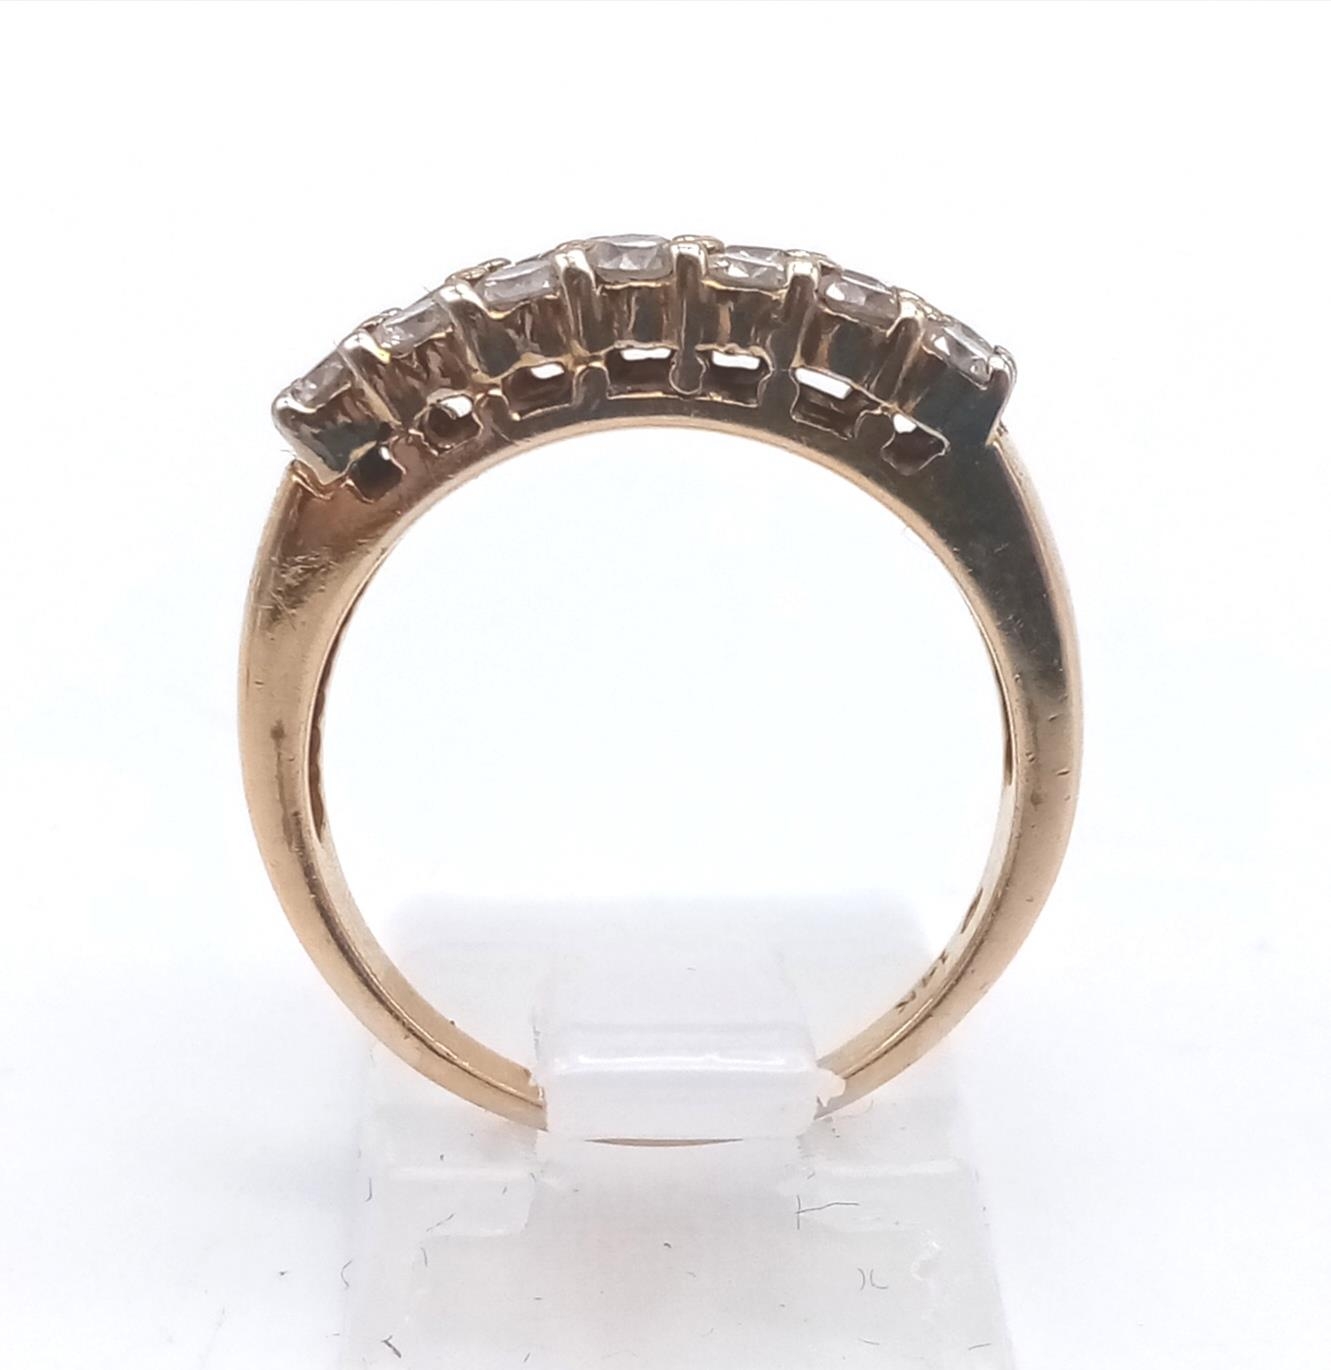 A 14 K yellow gold ring with two rows of diamonds (0.6 carats). Ring size: N, weight: 5.2 g. - Image 4 of 5